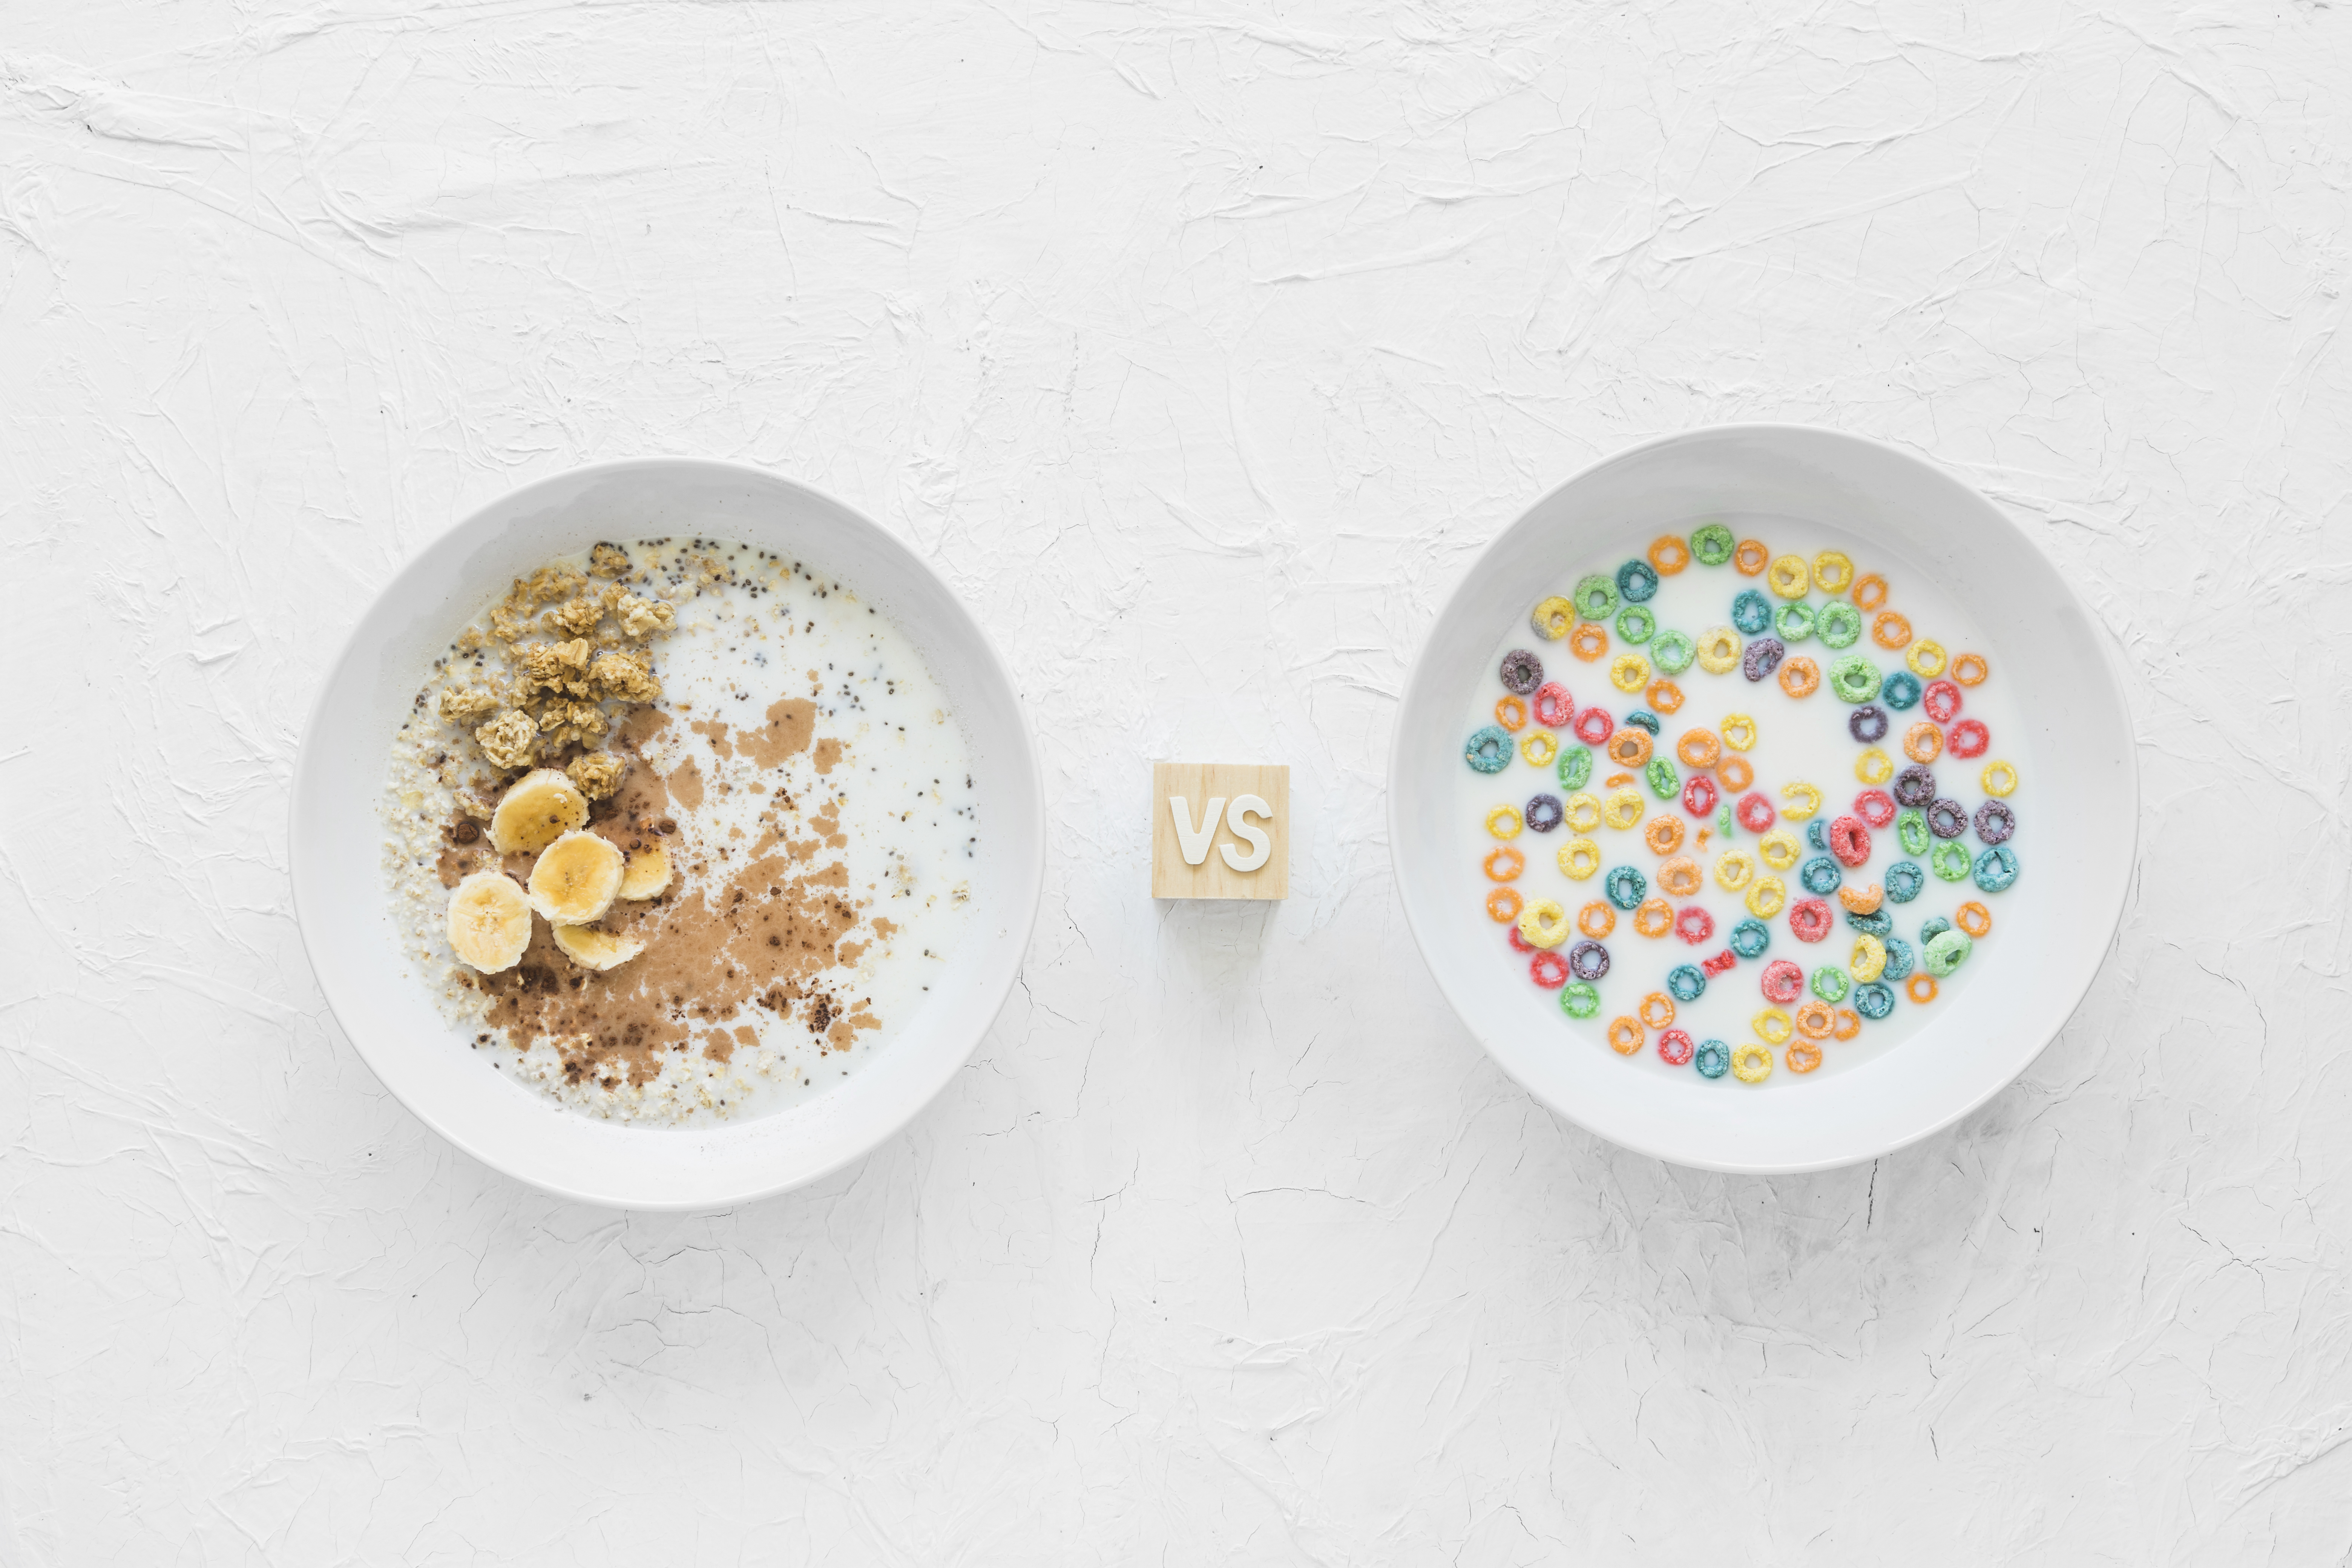 Sugar vs. Artificial Sweeteners: Which Is Better for Your Health?"